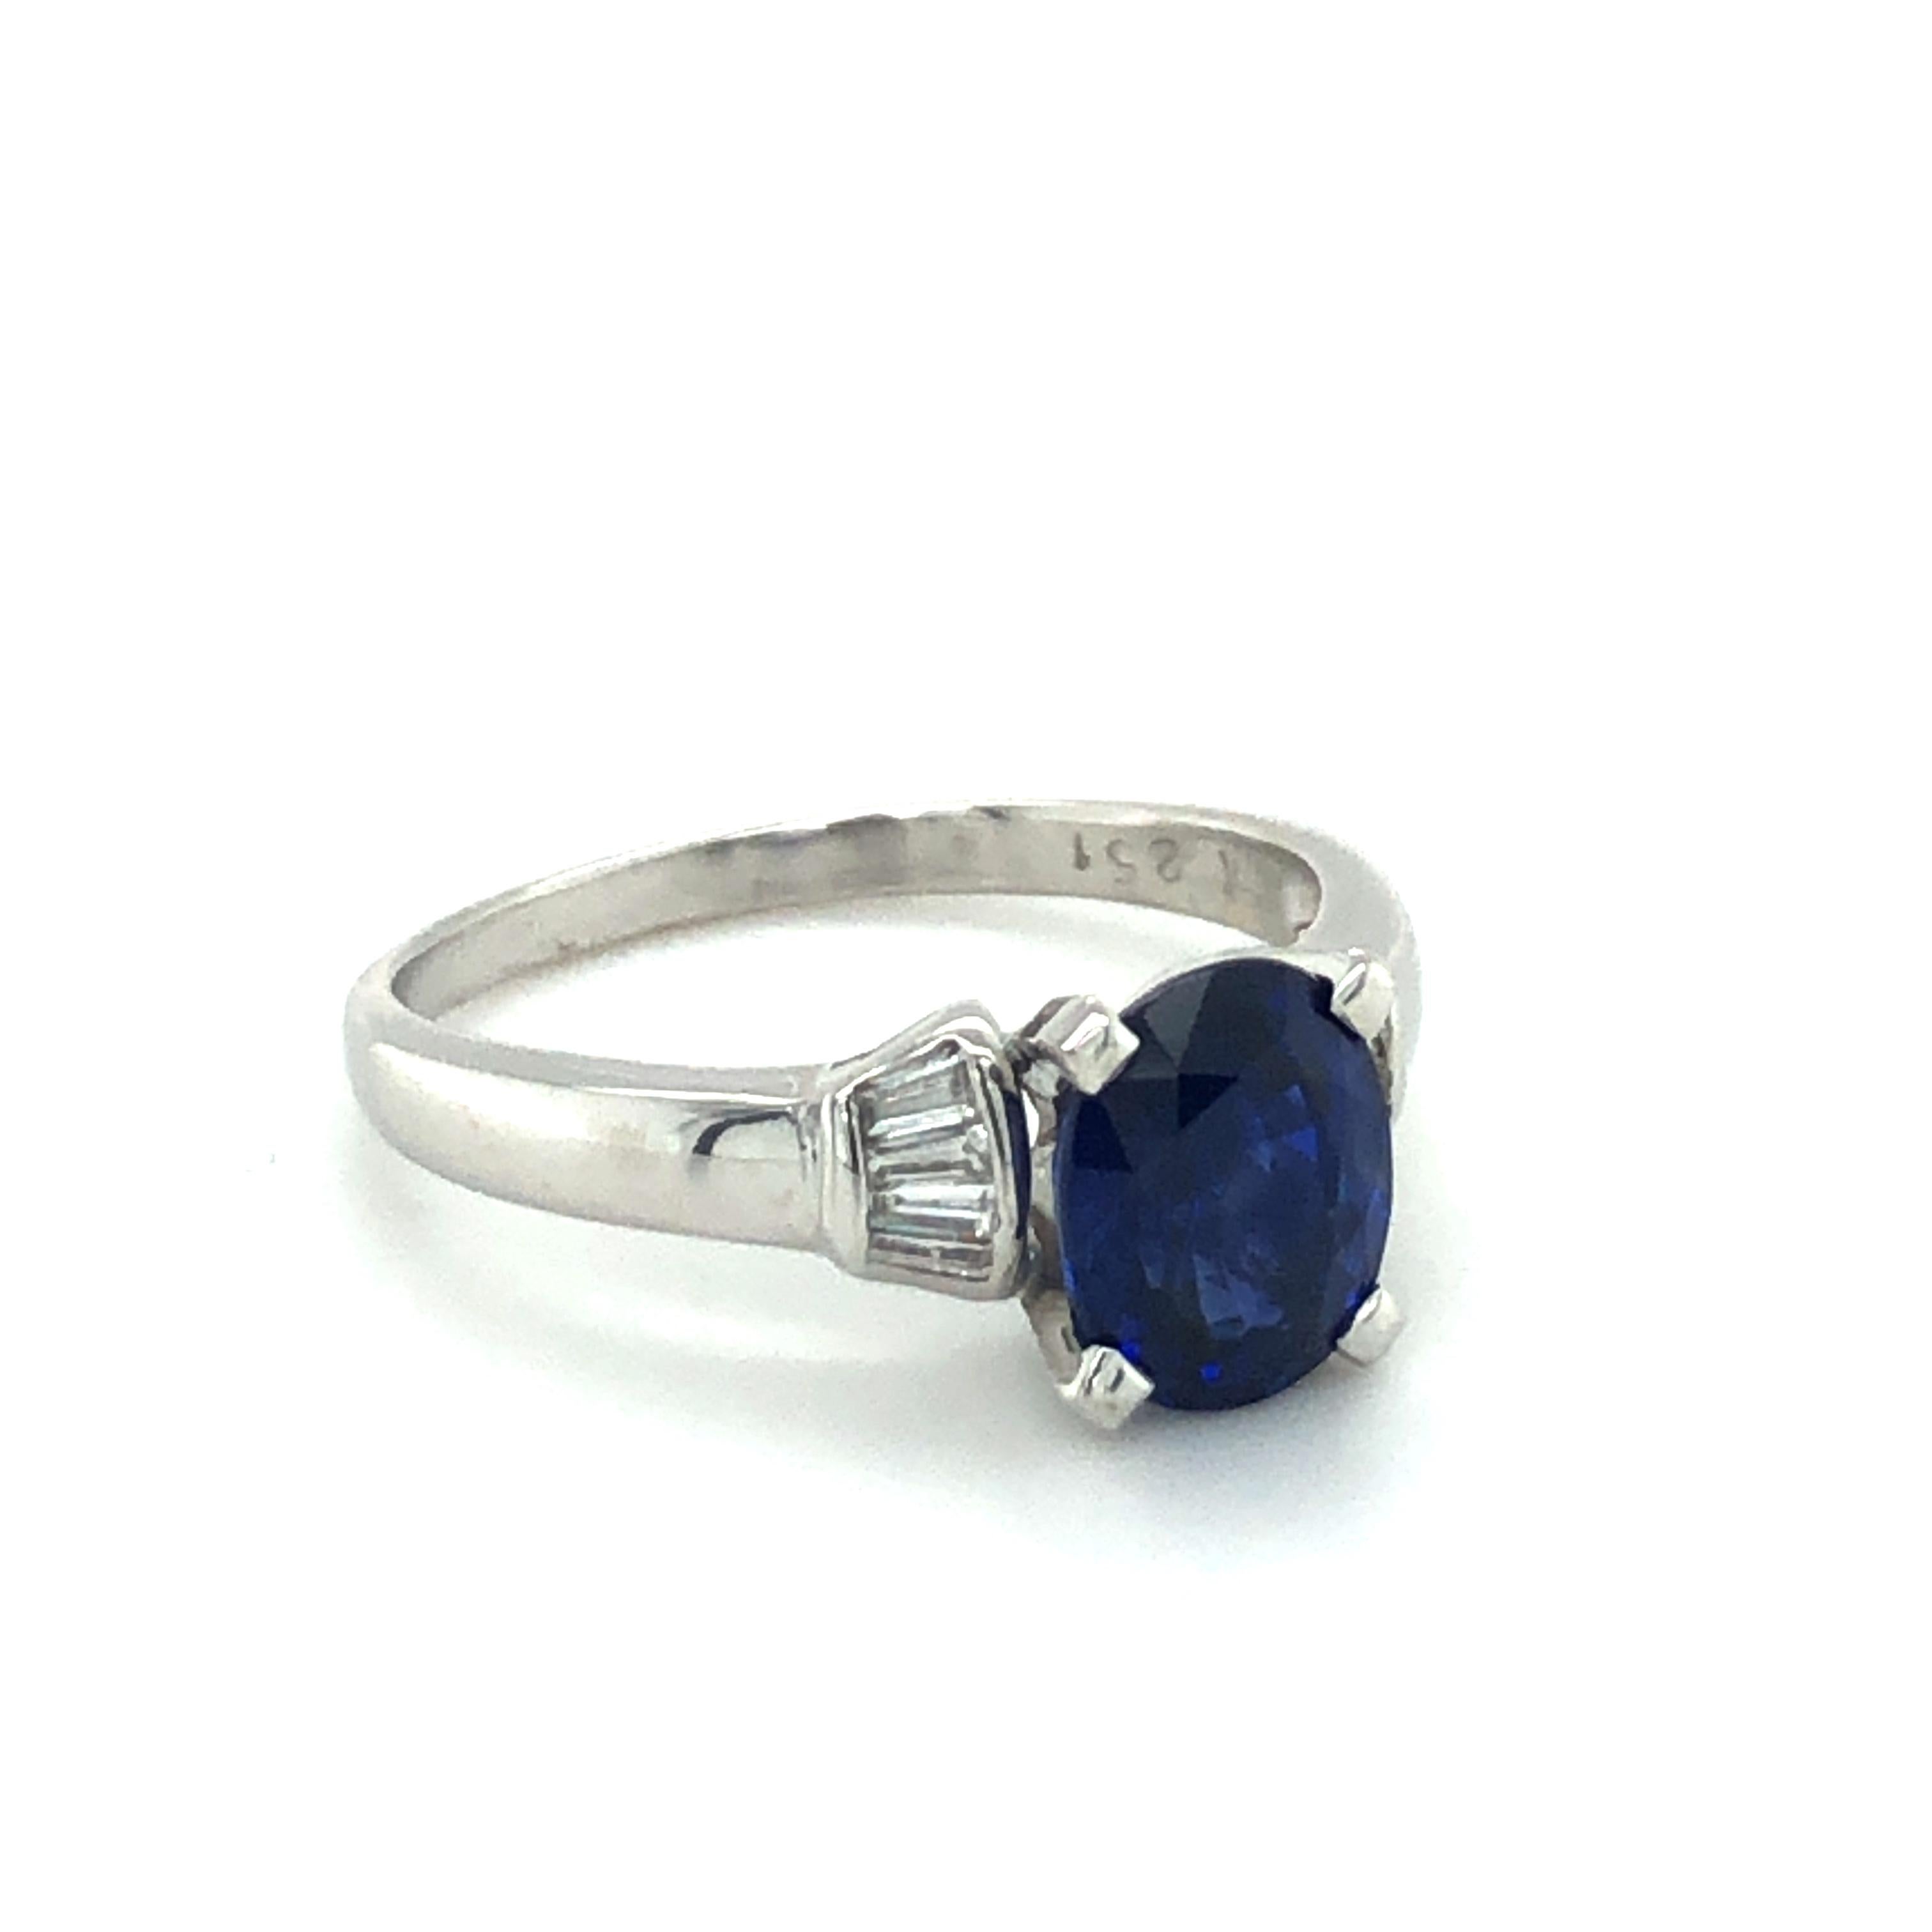 This beautiful and timeless ring in 18 karat white gold is set with a lively coloured cushion-shaped sapphire of approximately 2.51 carats. Accented by 8 tapered baguette-shaped diamonds of G/H colour and vs clarity, total weight approximately 0.22